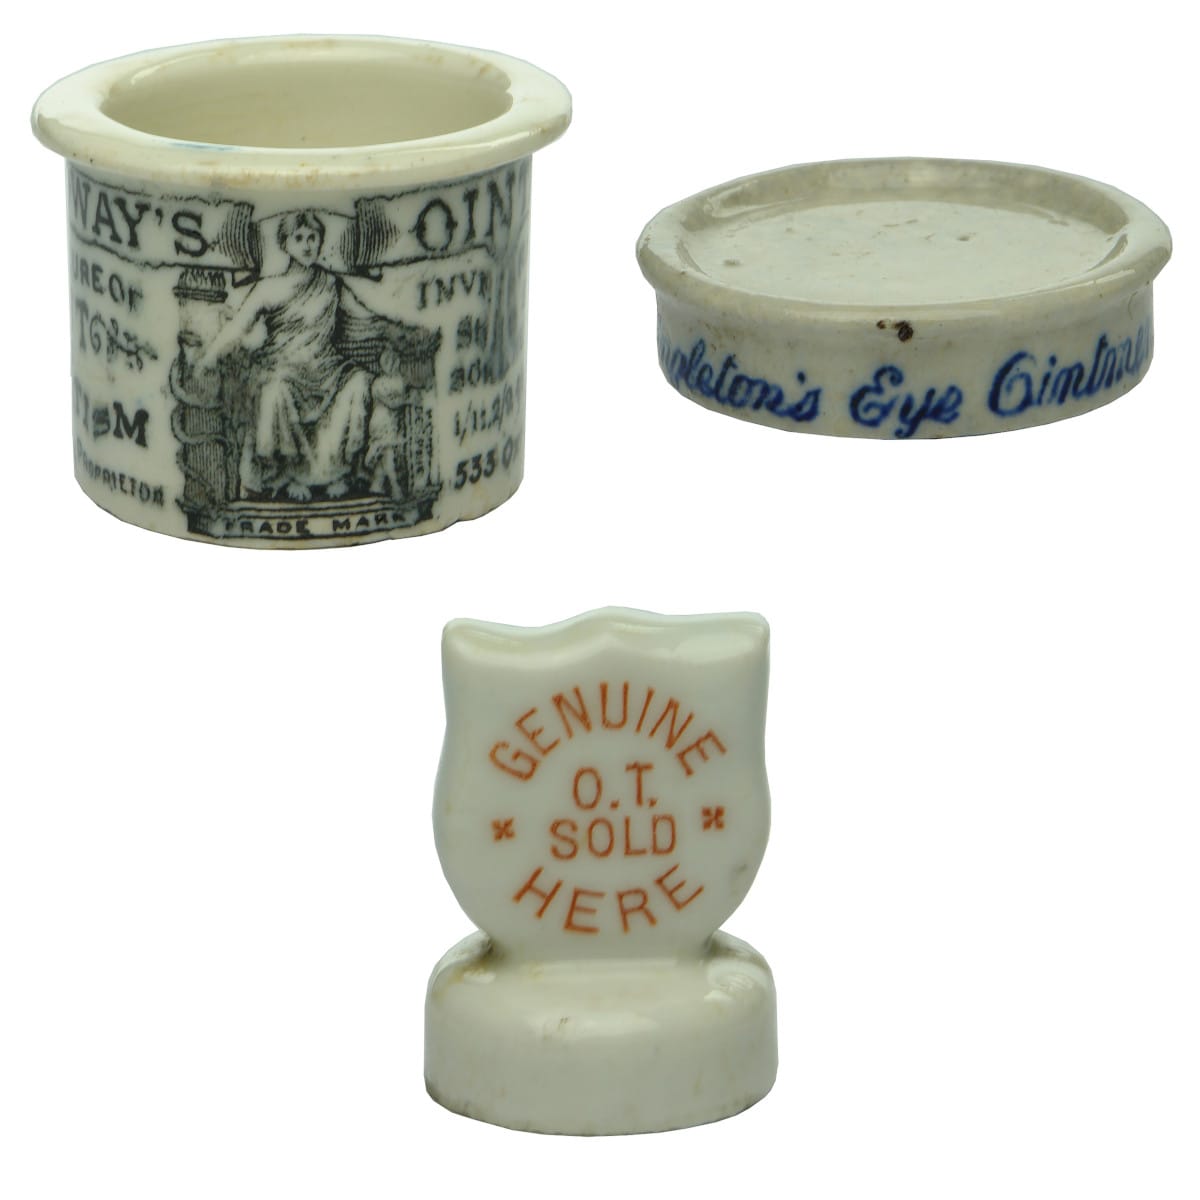 3 Ceramic Items: Holloway's Ointment Pot; Singleton's Eye Ointment; Genuine O. T. Sold Here advertising cork topper.